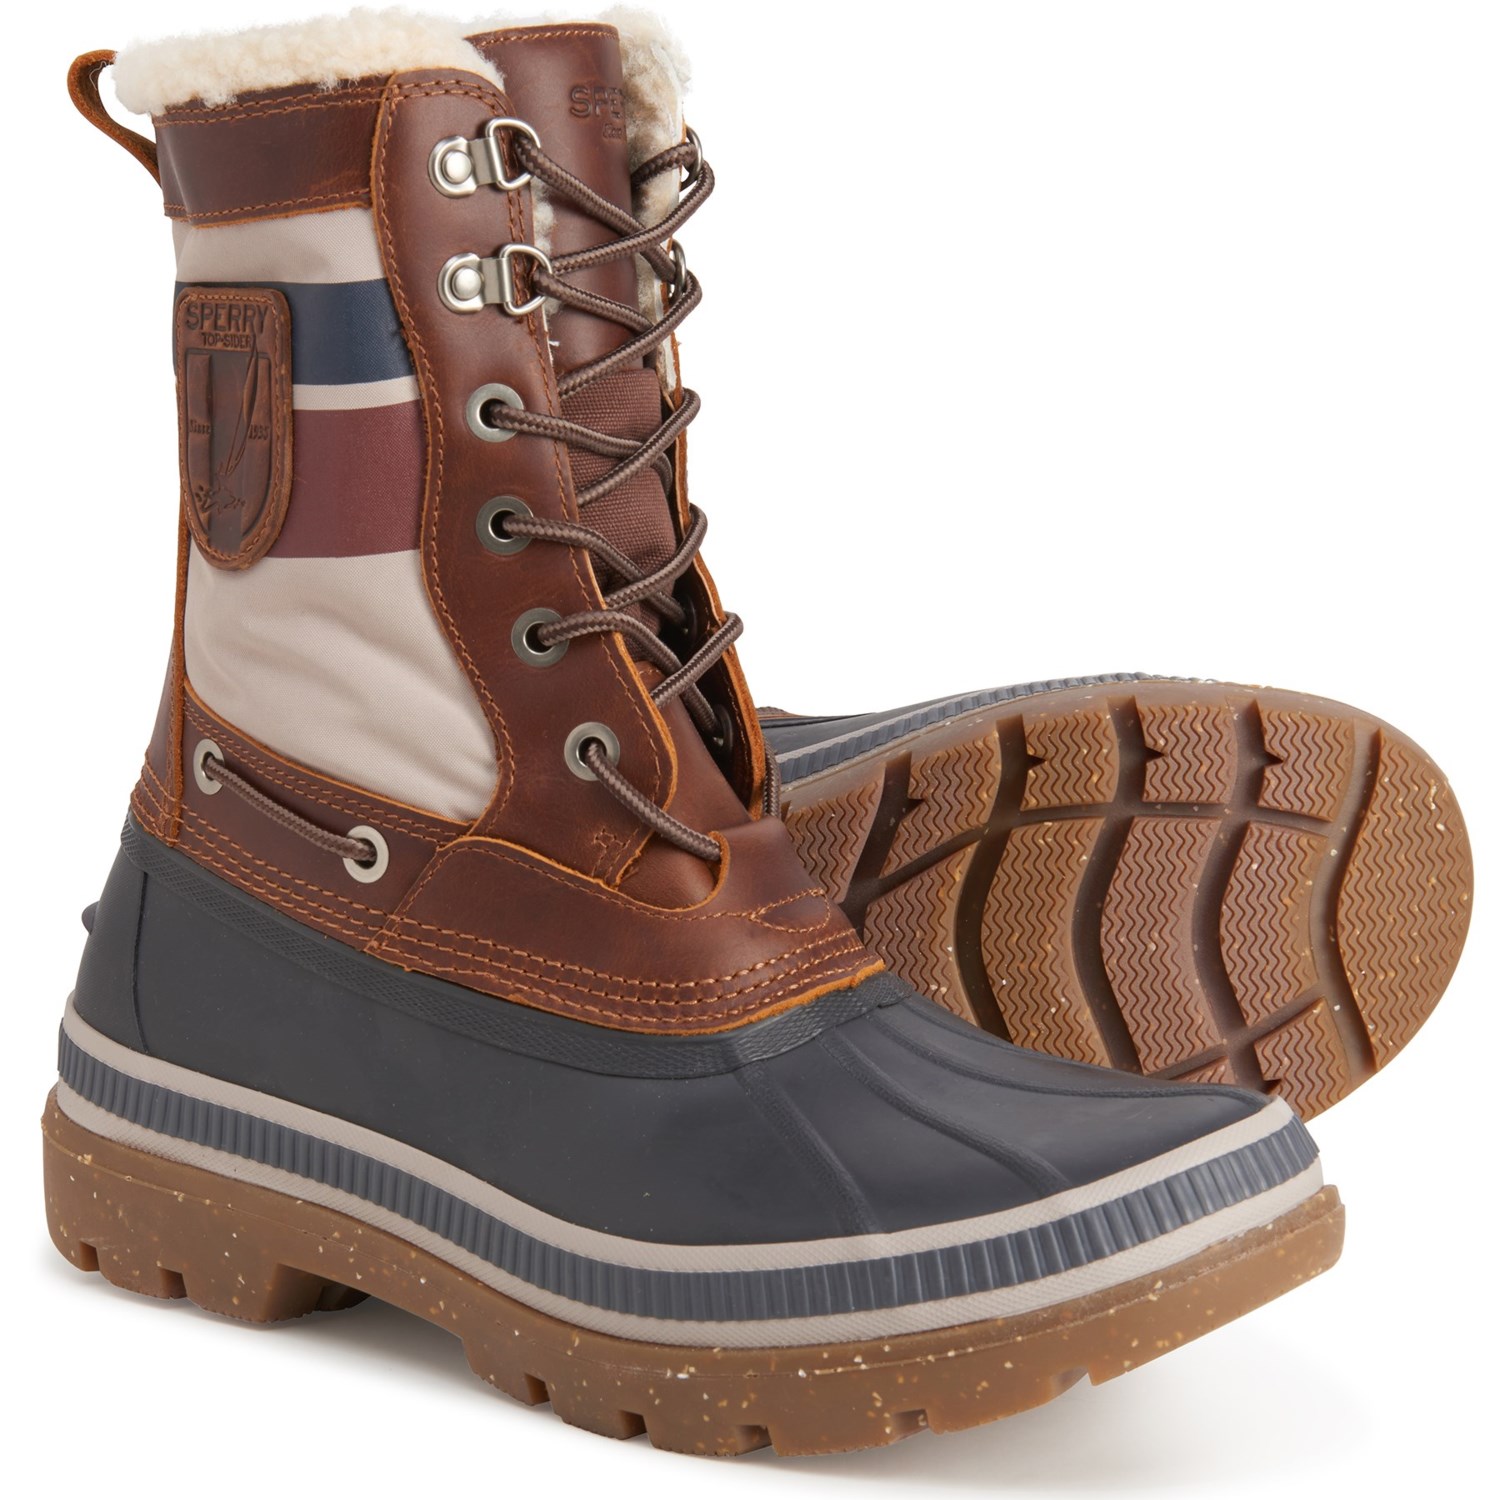 Sperry Ice Bay Thinsulate® Tall Duck 